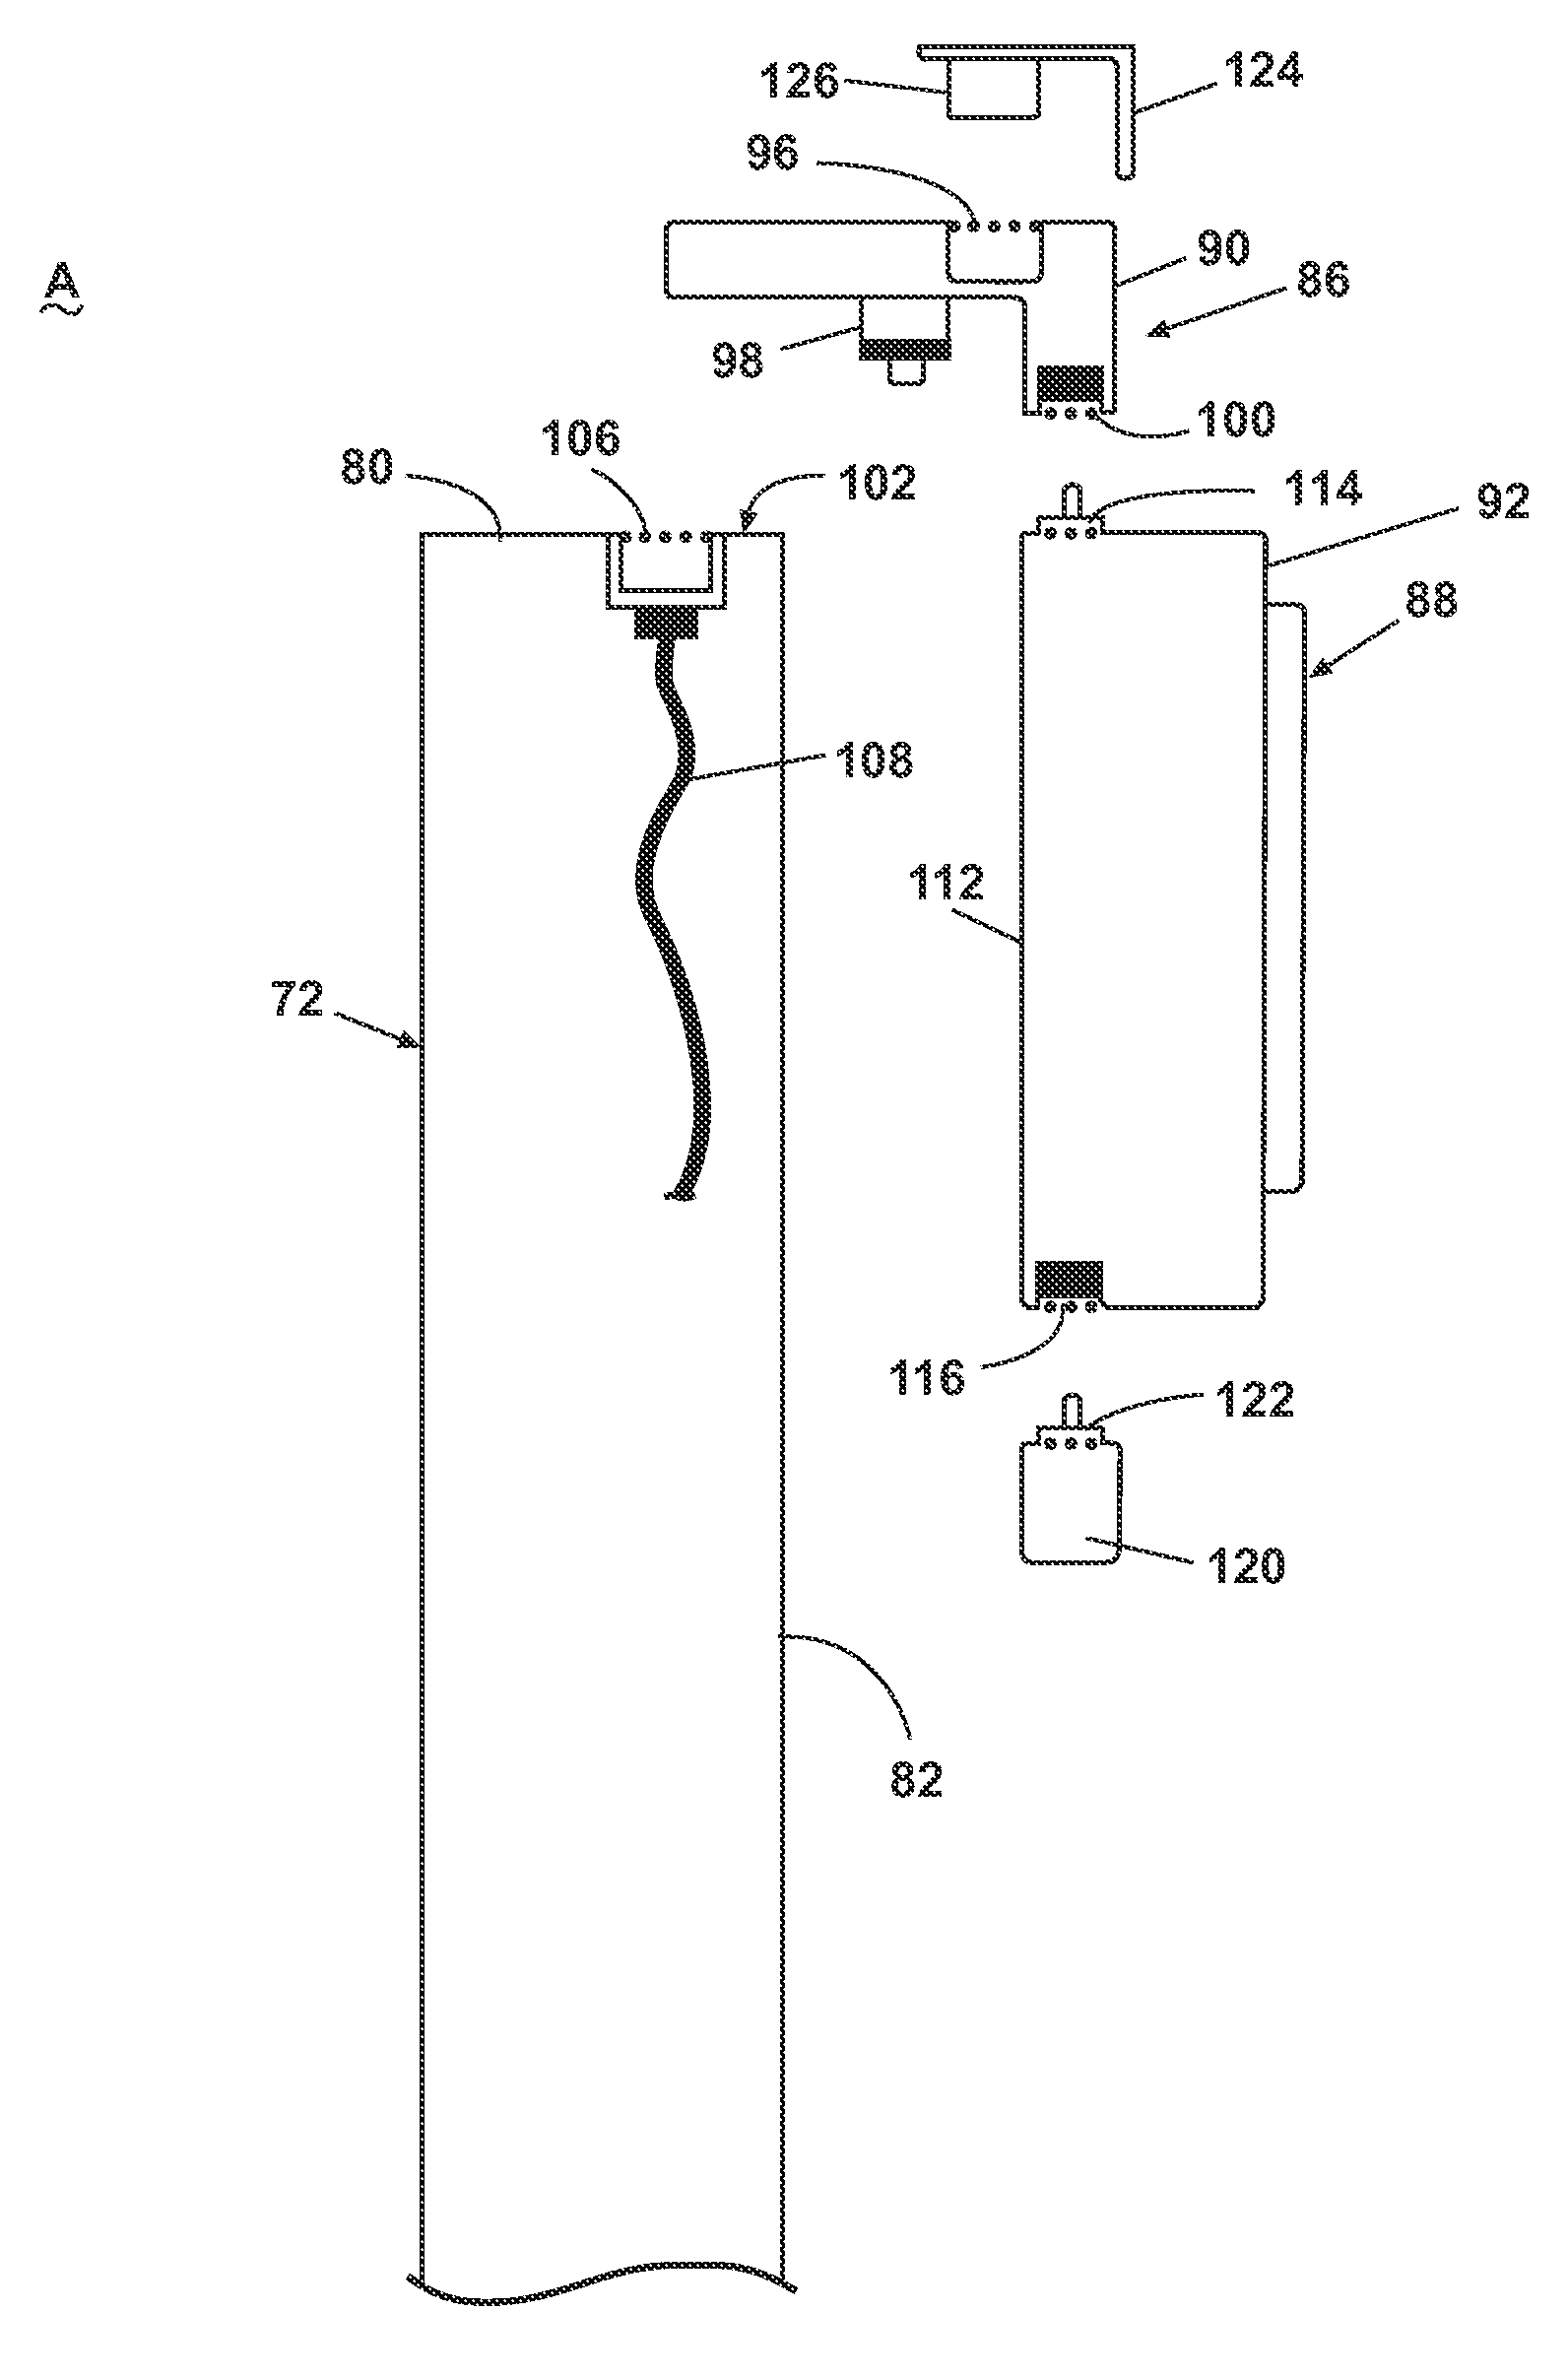 Appliance with an adapter to simultaneously couple multiple consumer electronic devices